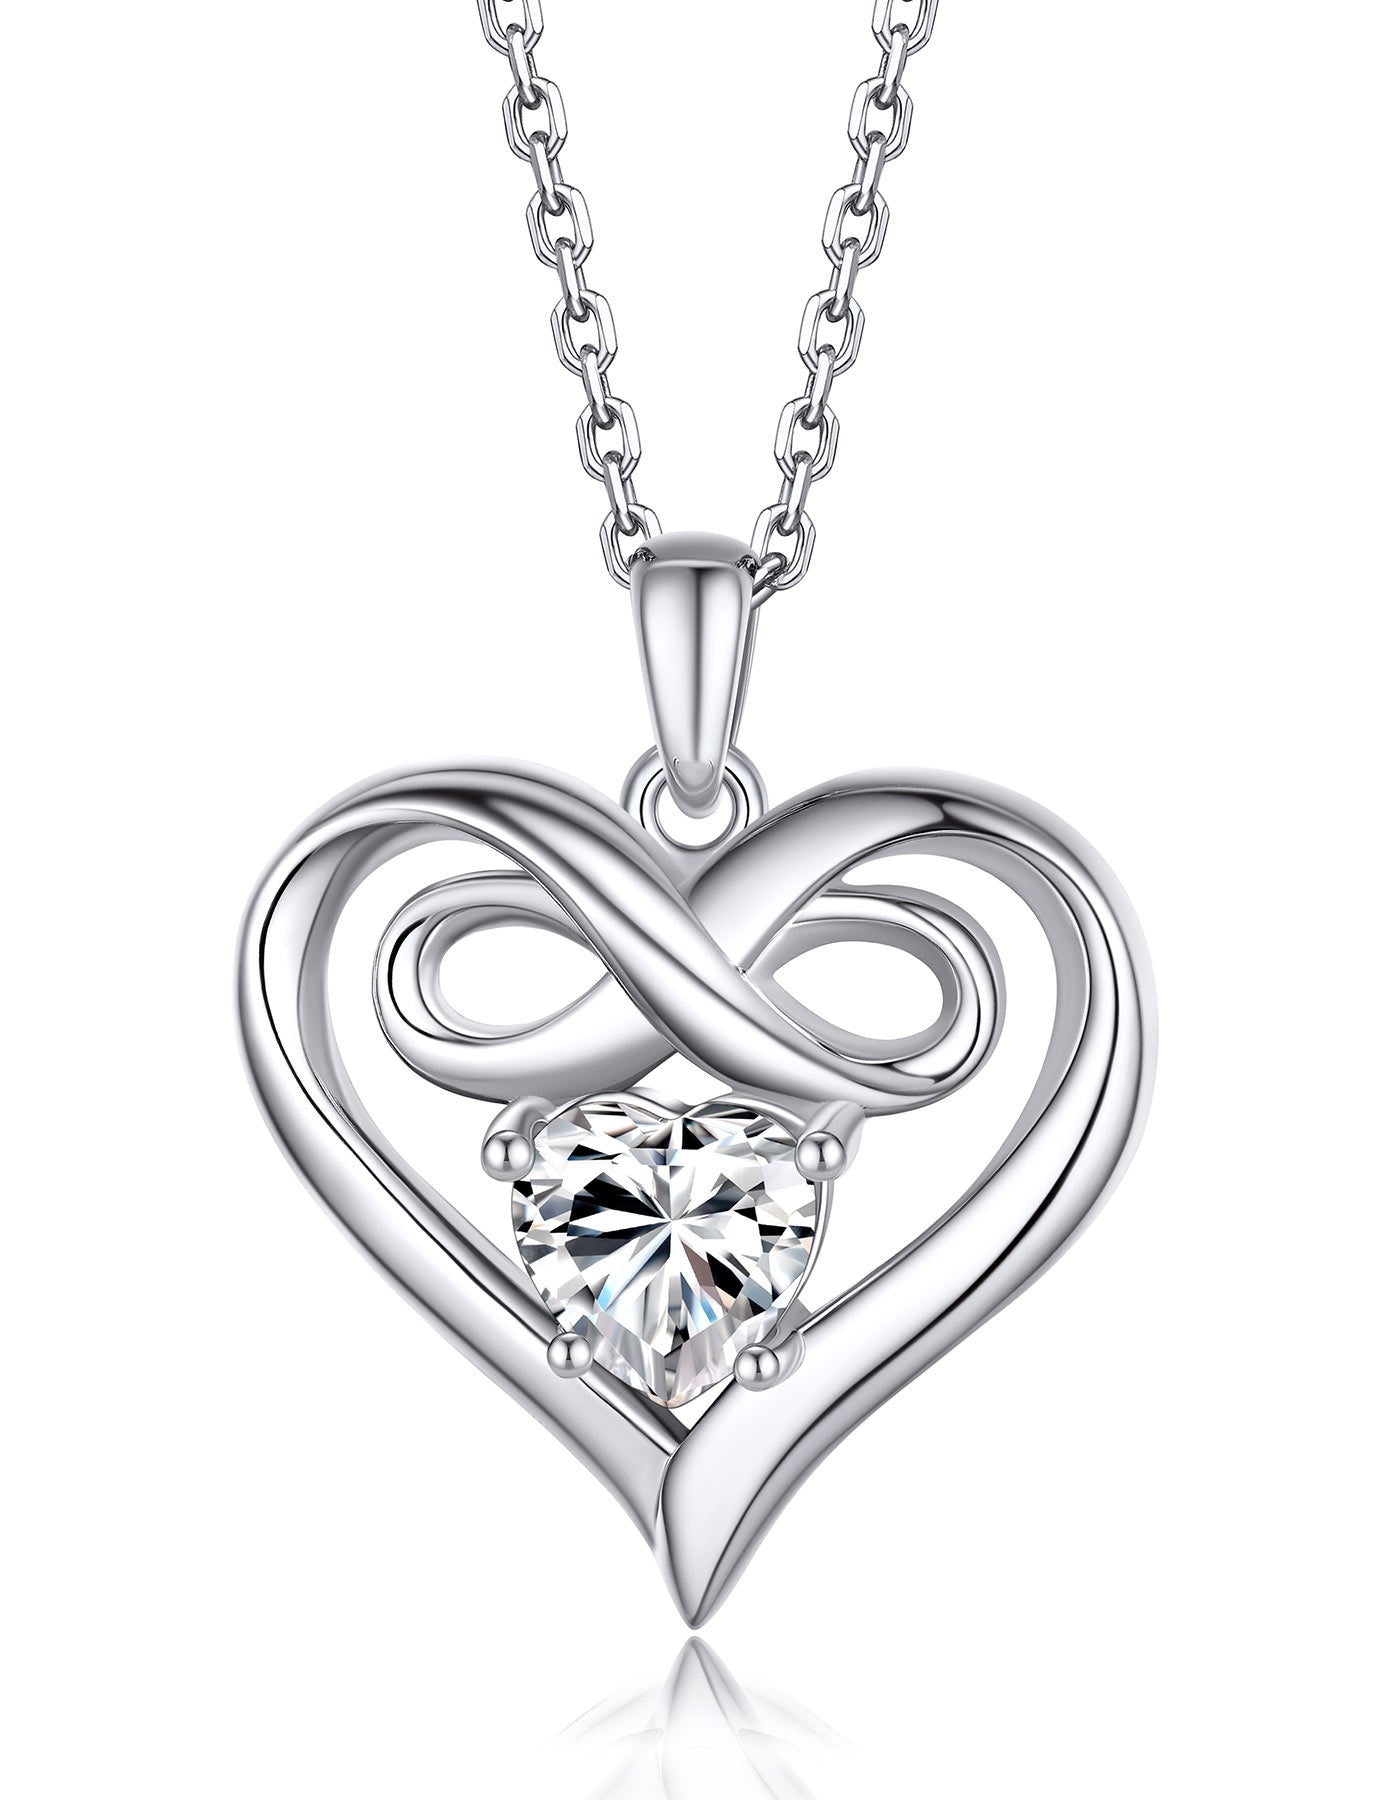 MomentWish Infinity Heart Necklace Moissanite Pendant Necklace For Women